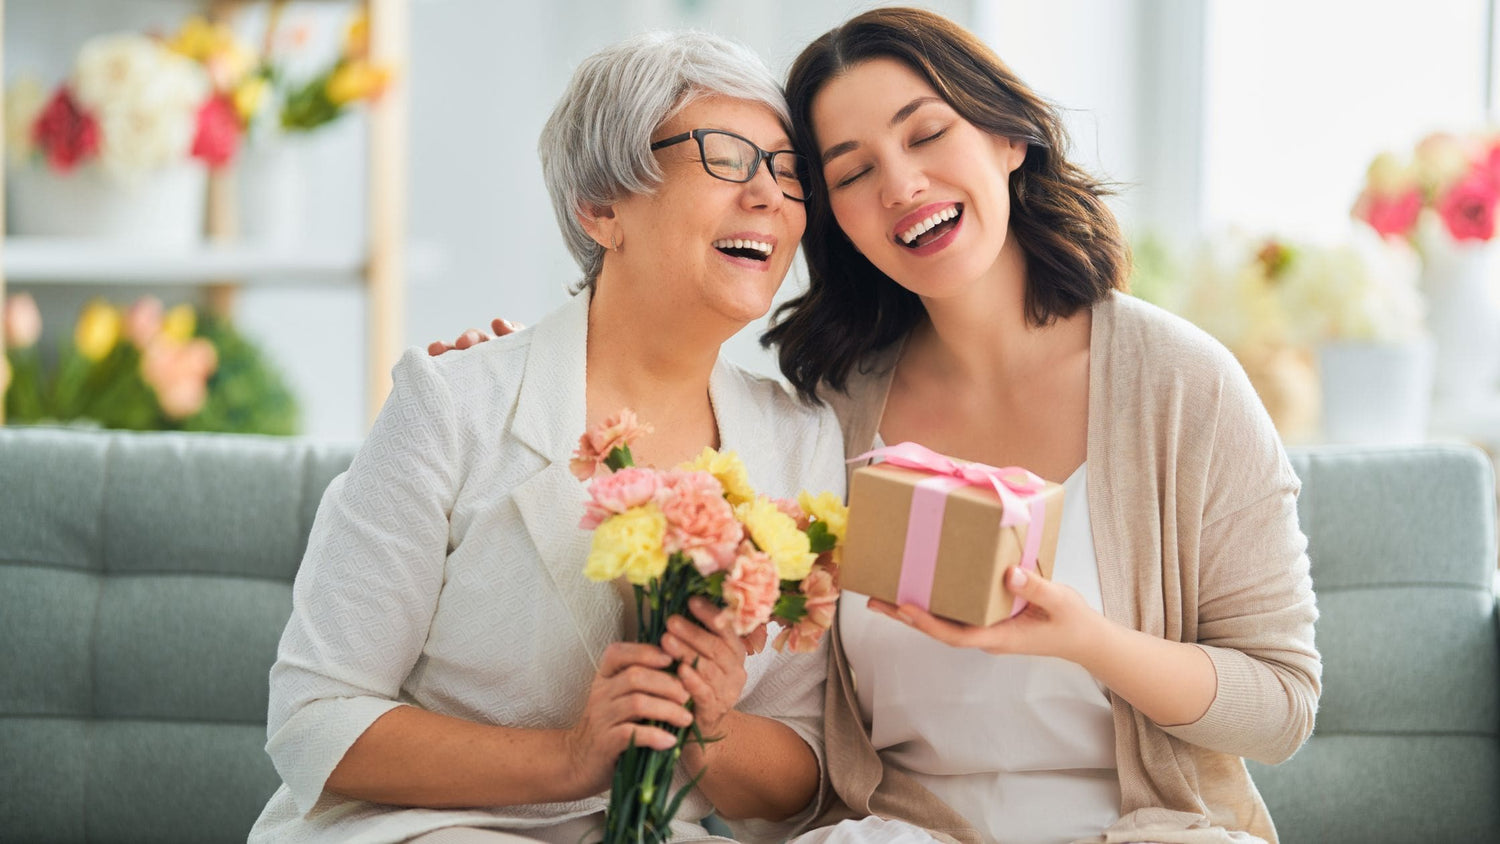 How to Celebrate Mother's Day: 55+ Ideas to Make Her Feel Special